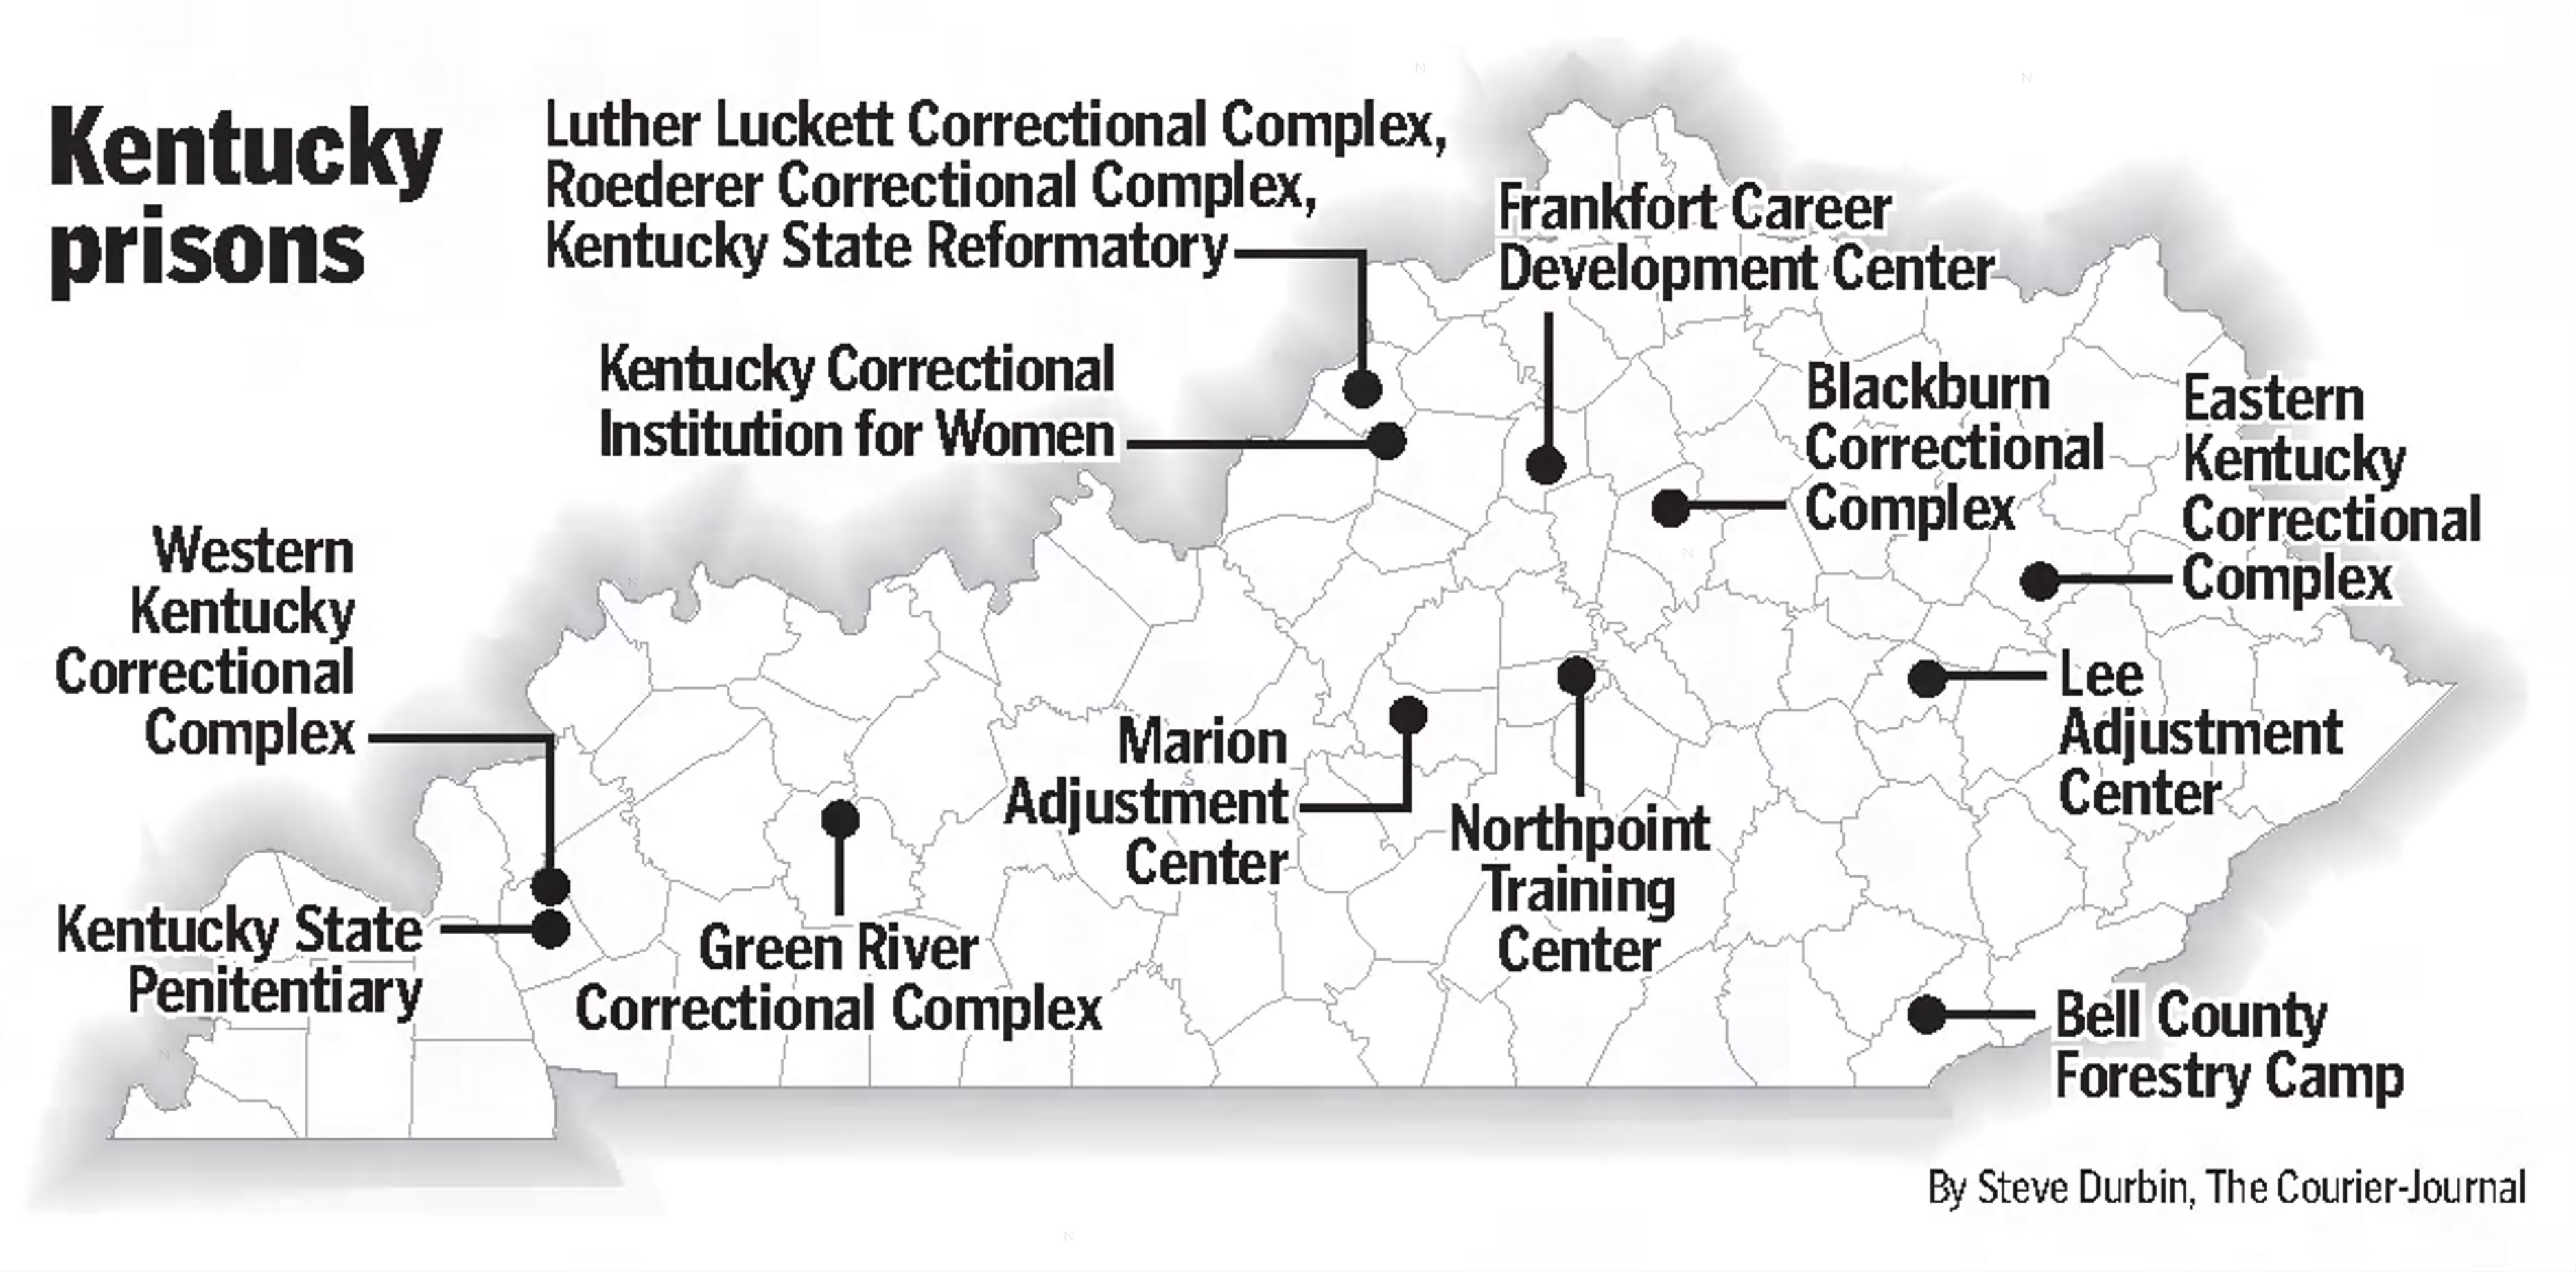 Prisons & Treatment Facilities | Kentucky Historic Institutions